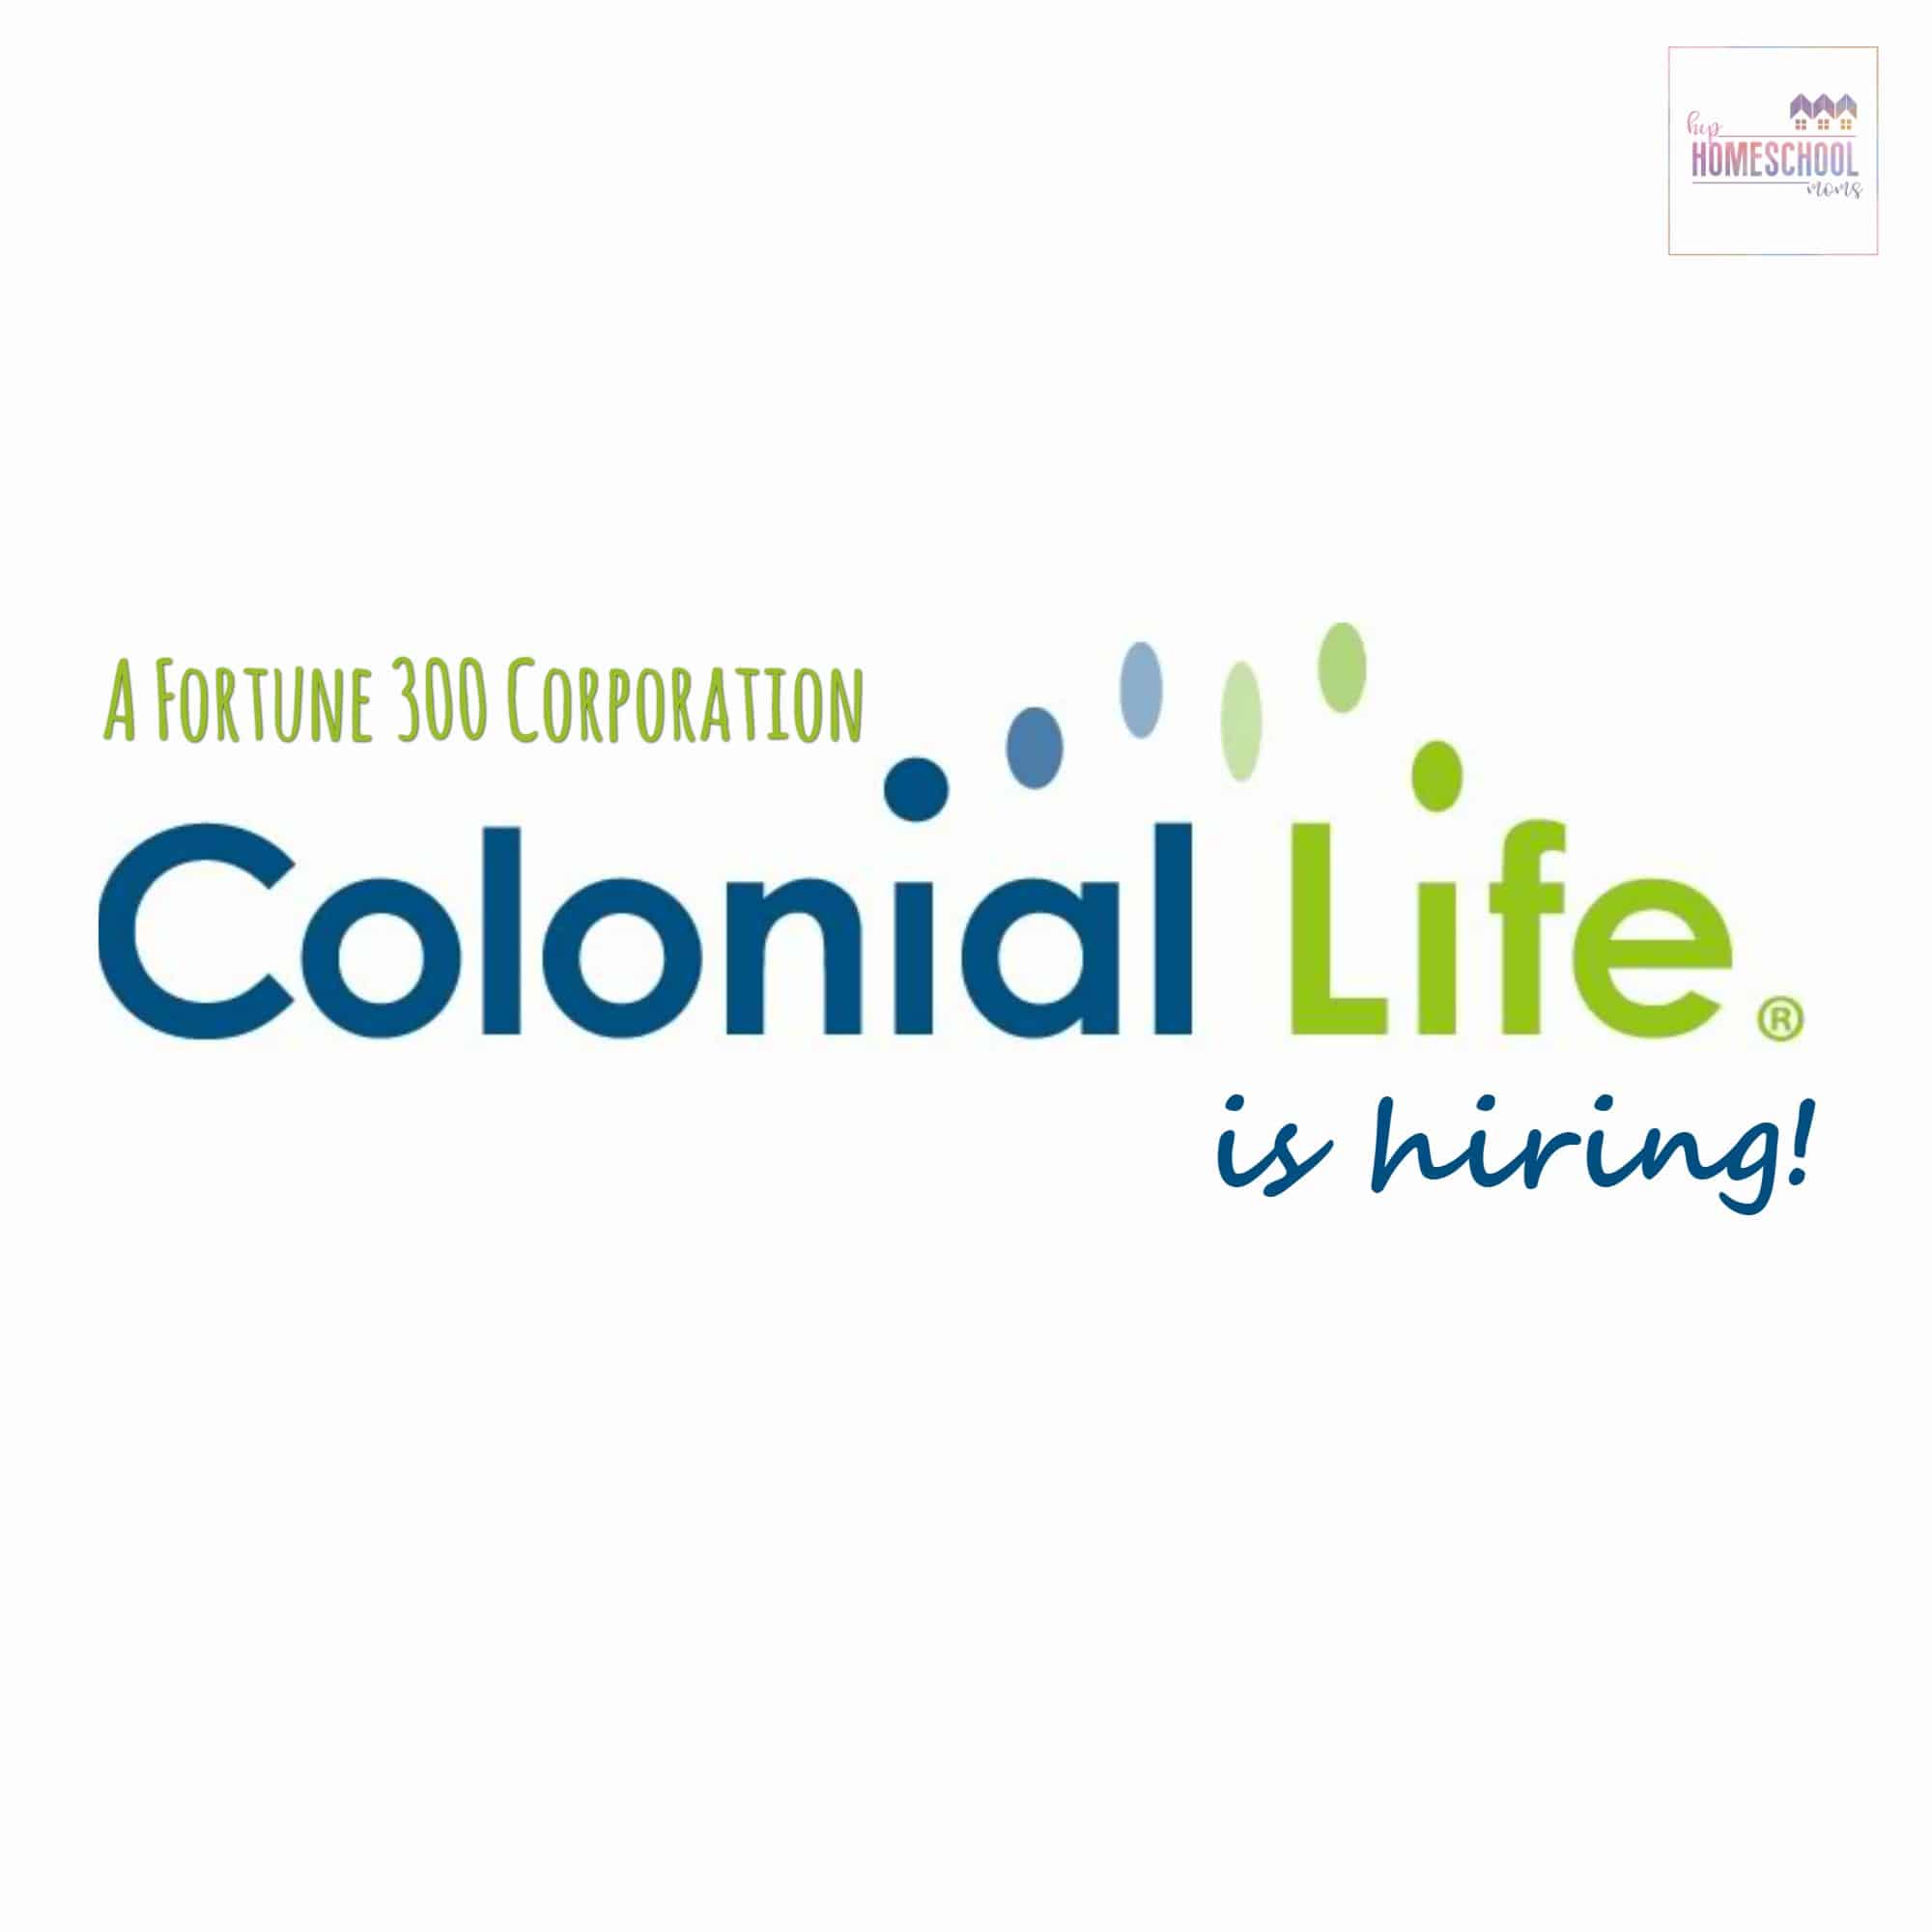 Fortune 300 Company, Colonial Life, is Hiring! THIS JOB IS CLOSED